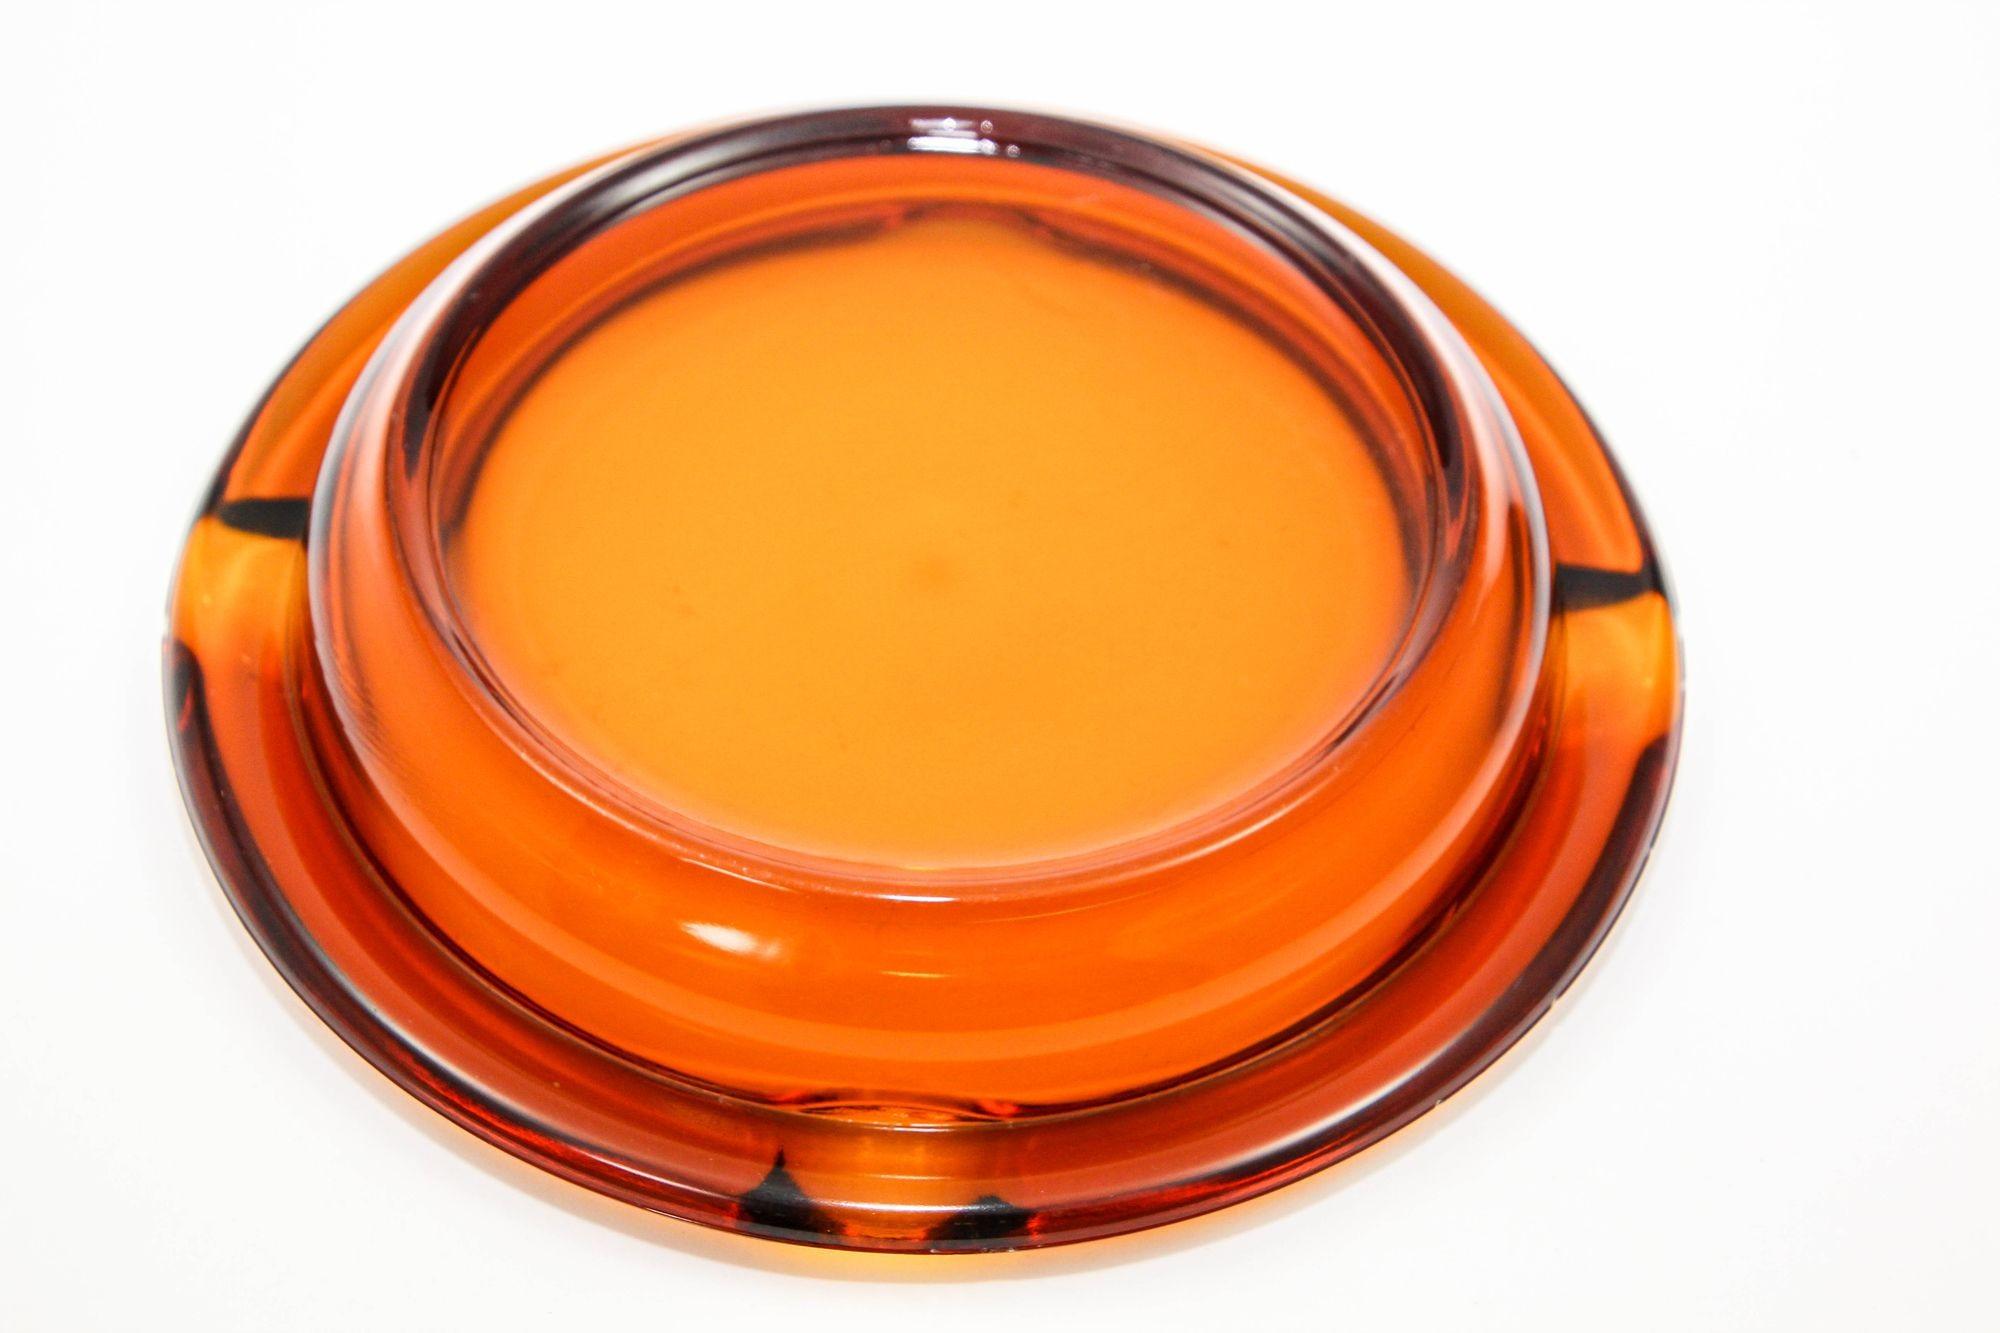 Moroccan Ashtray Hazel Atlas Round Amber Glass Large Cigar Ashtray 1960s In Good Condition For Sale In North Hollywood, CA